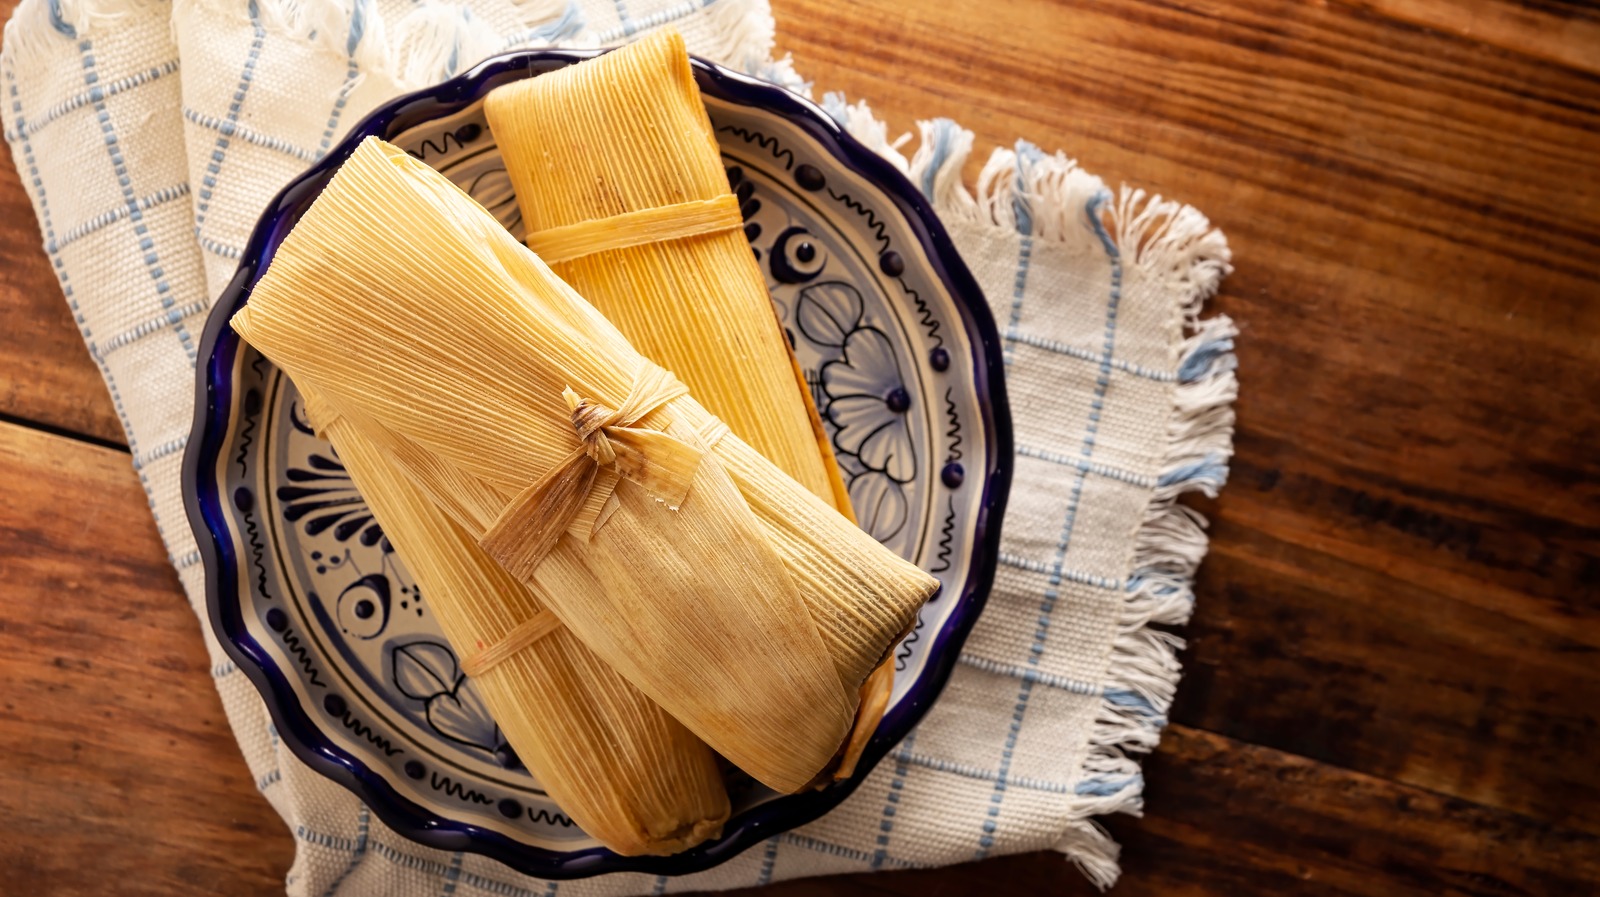 Dried Corn Husks for Tamales